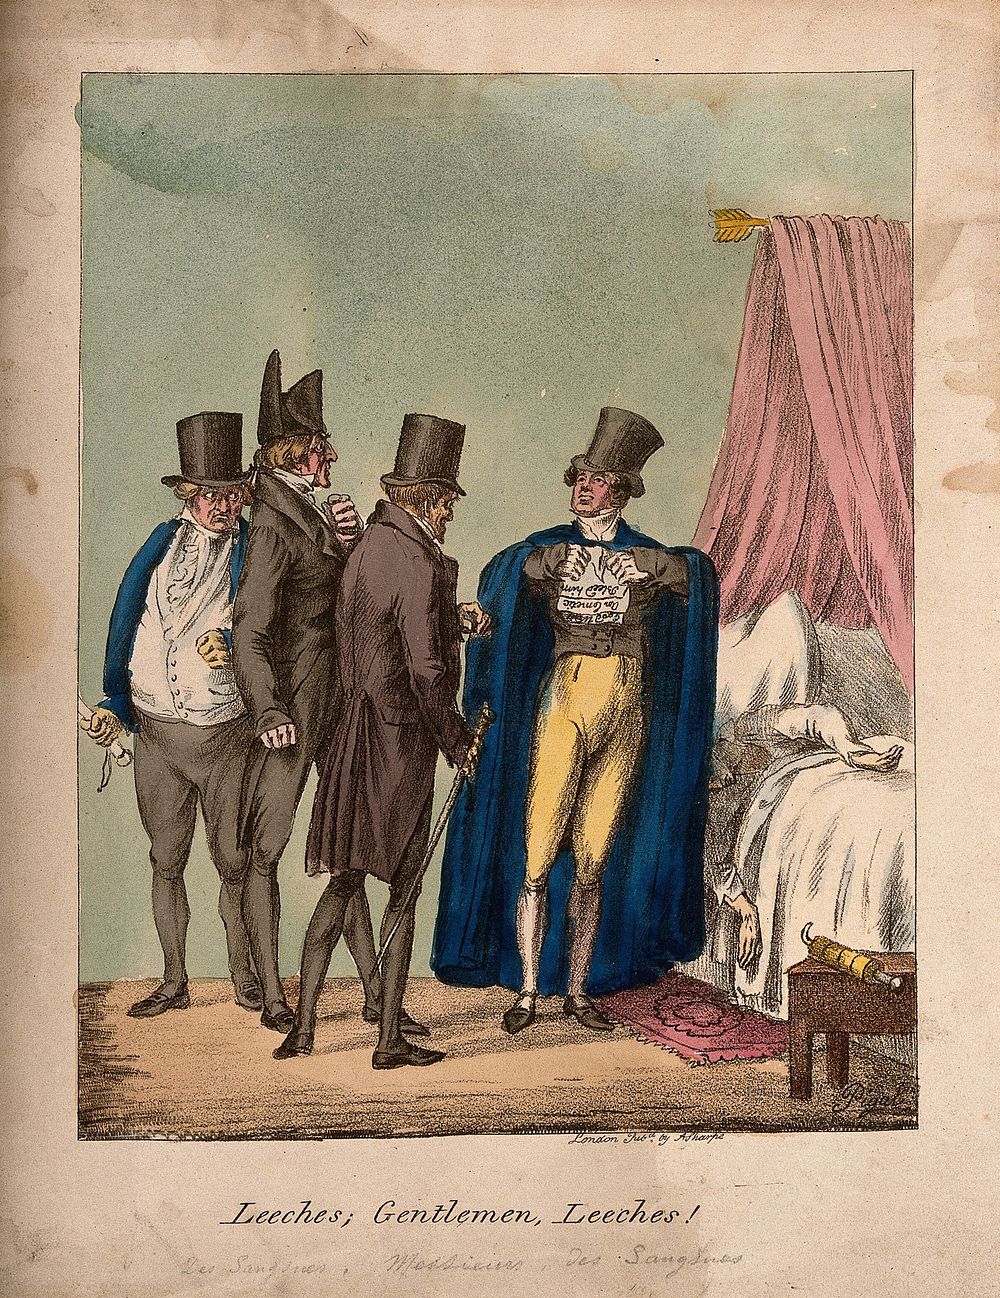 A group of fashionable physicians gathered around a sick patient listen to one of their number proclaiming the virtue of…